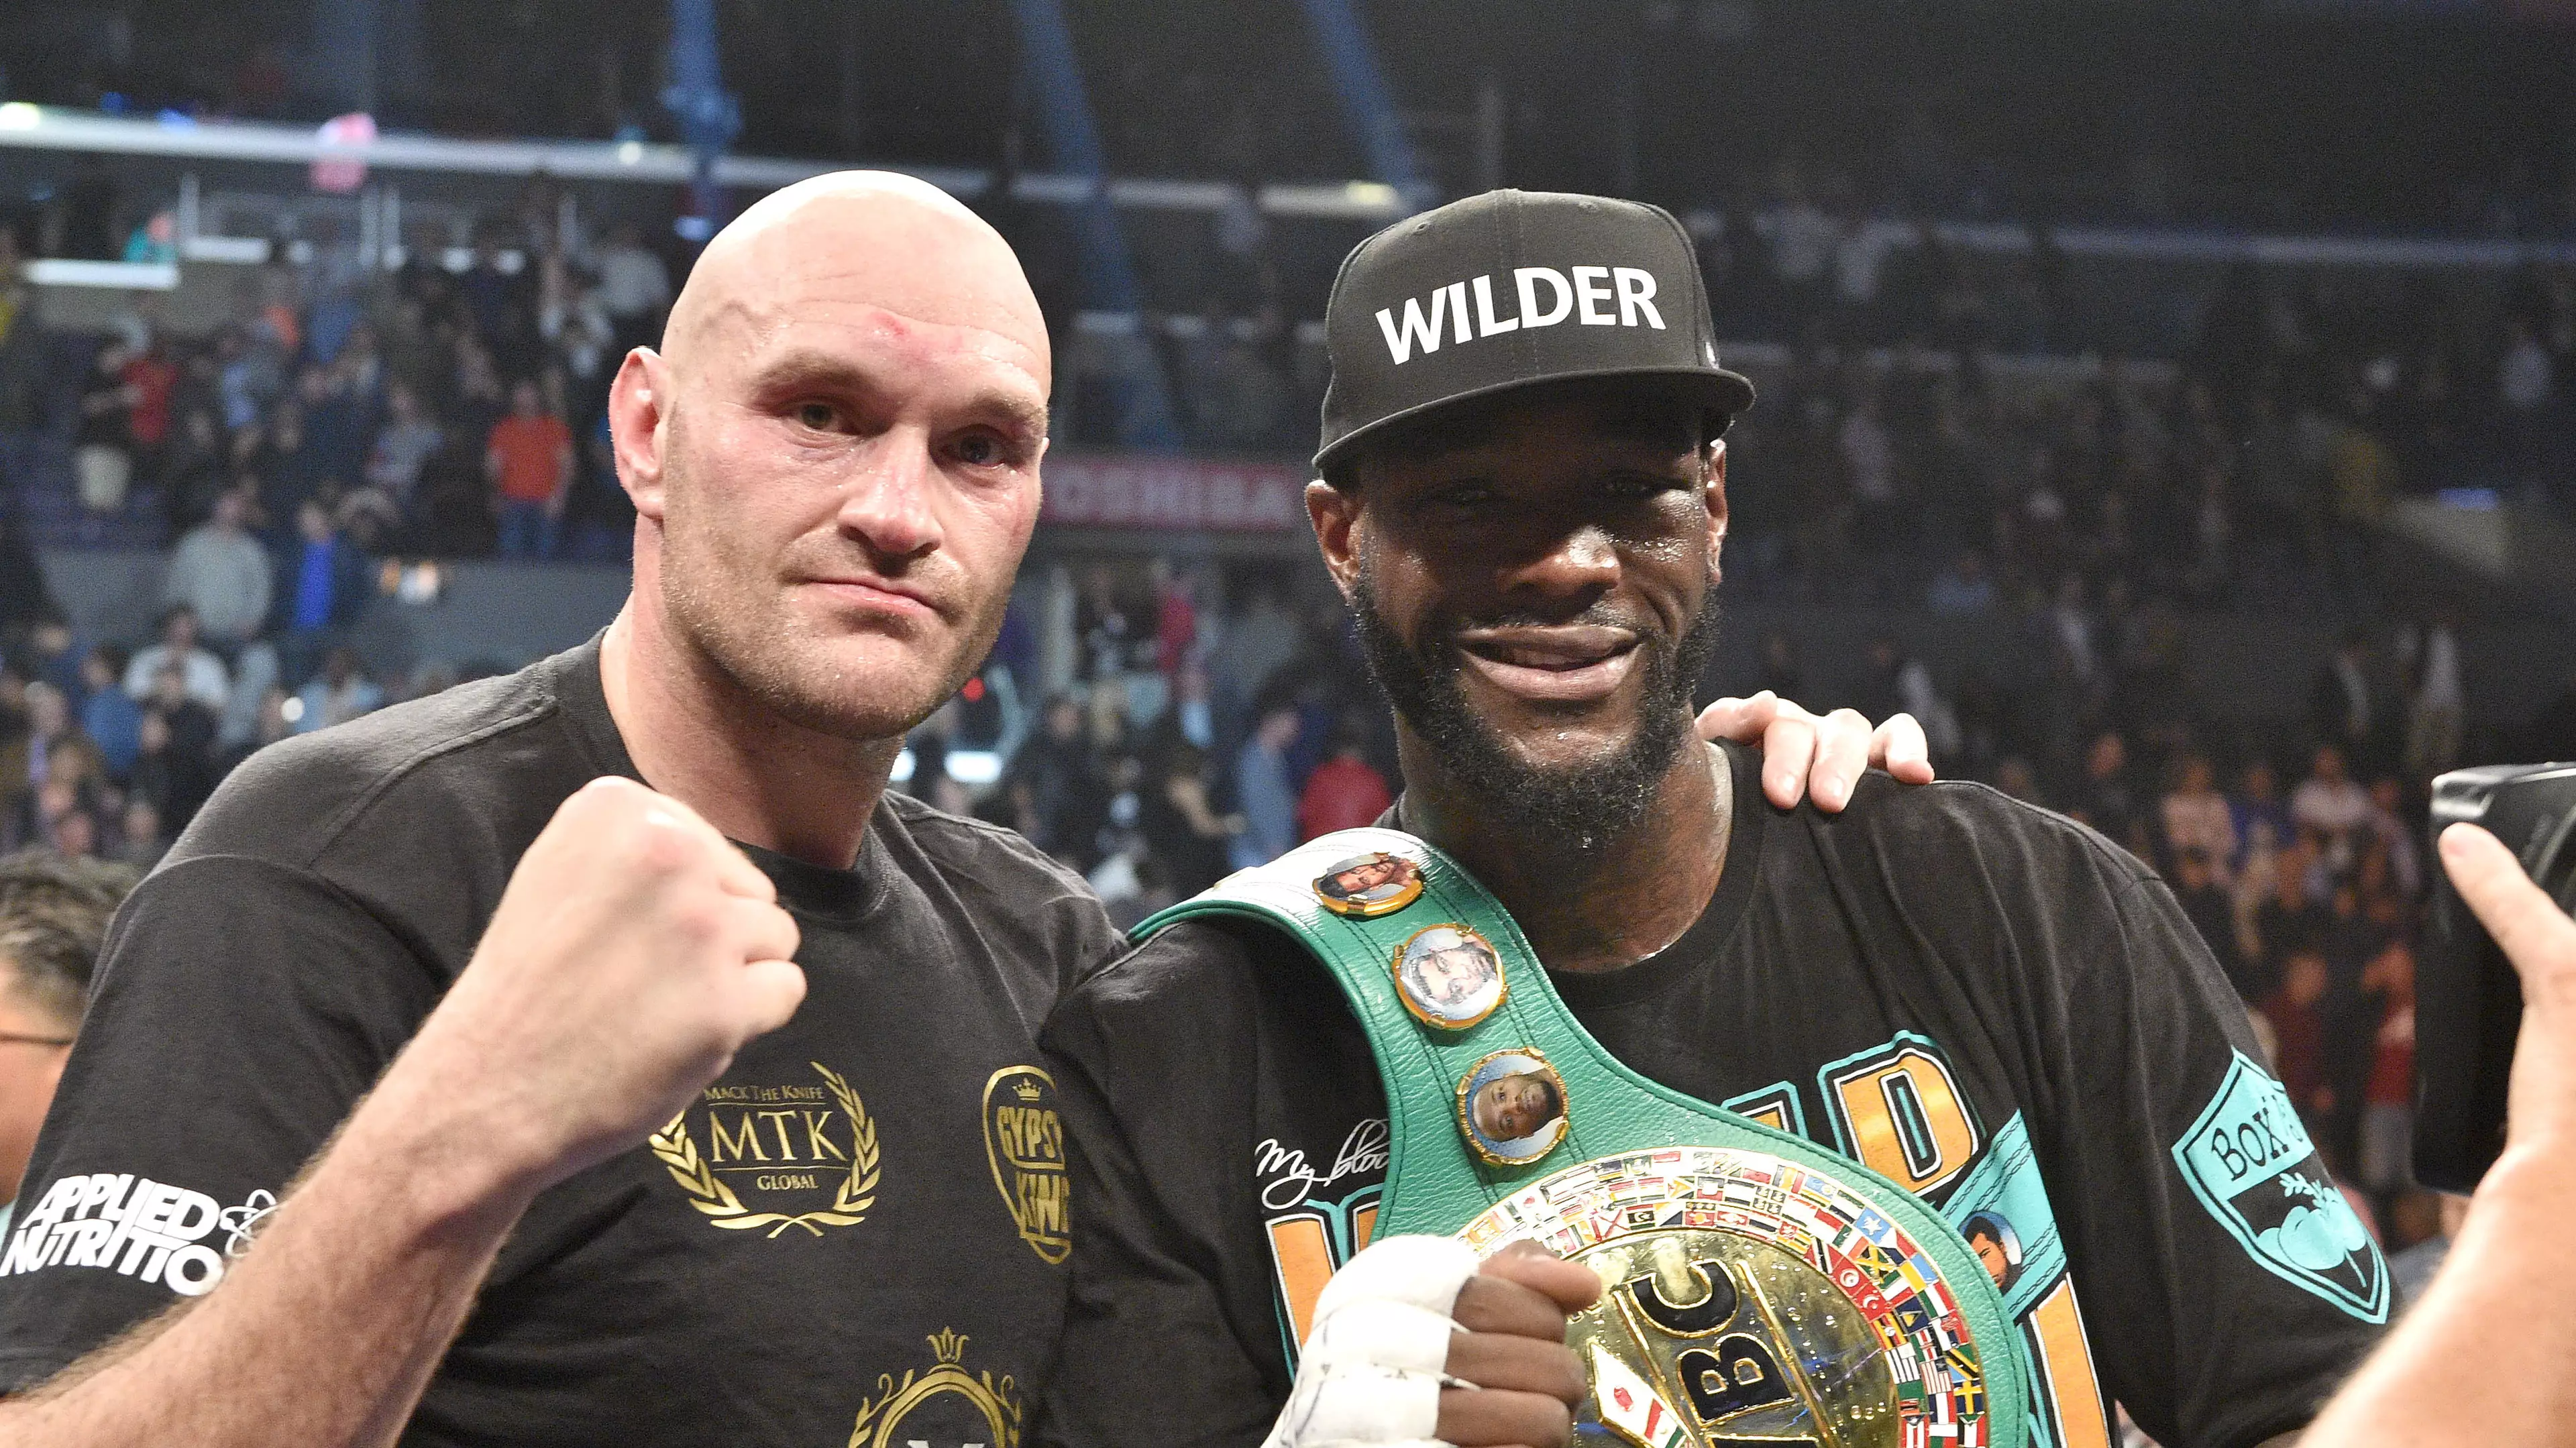 Fury and Wilder were full of respect for each other after the first fight. Image: PA Images